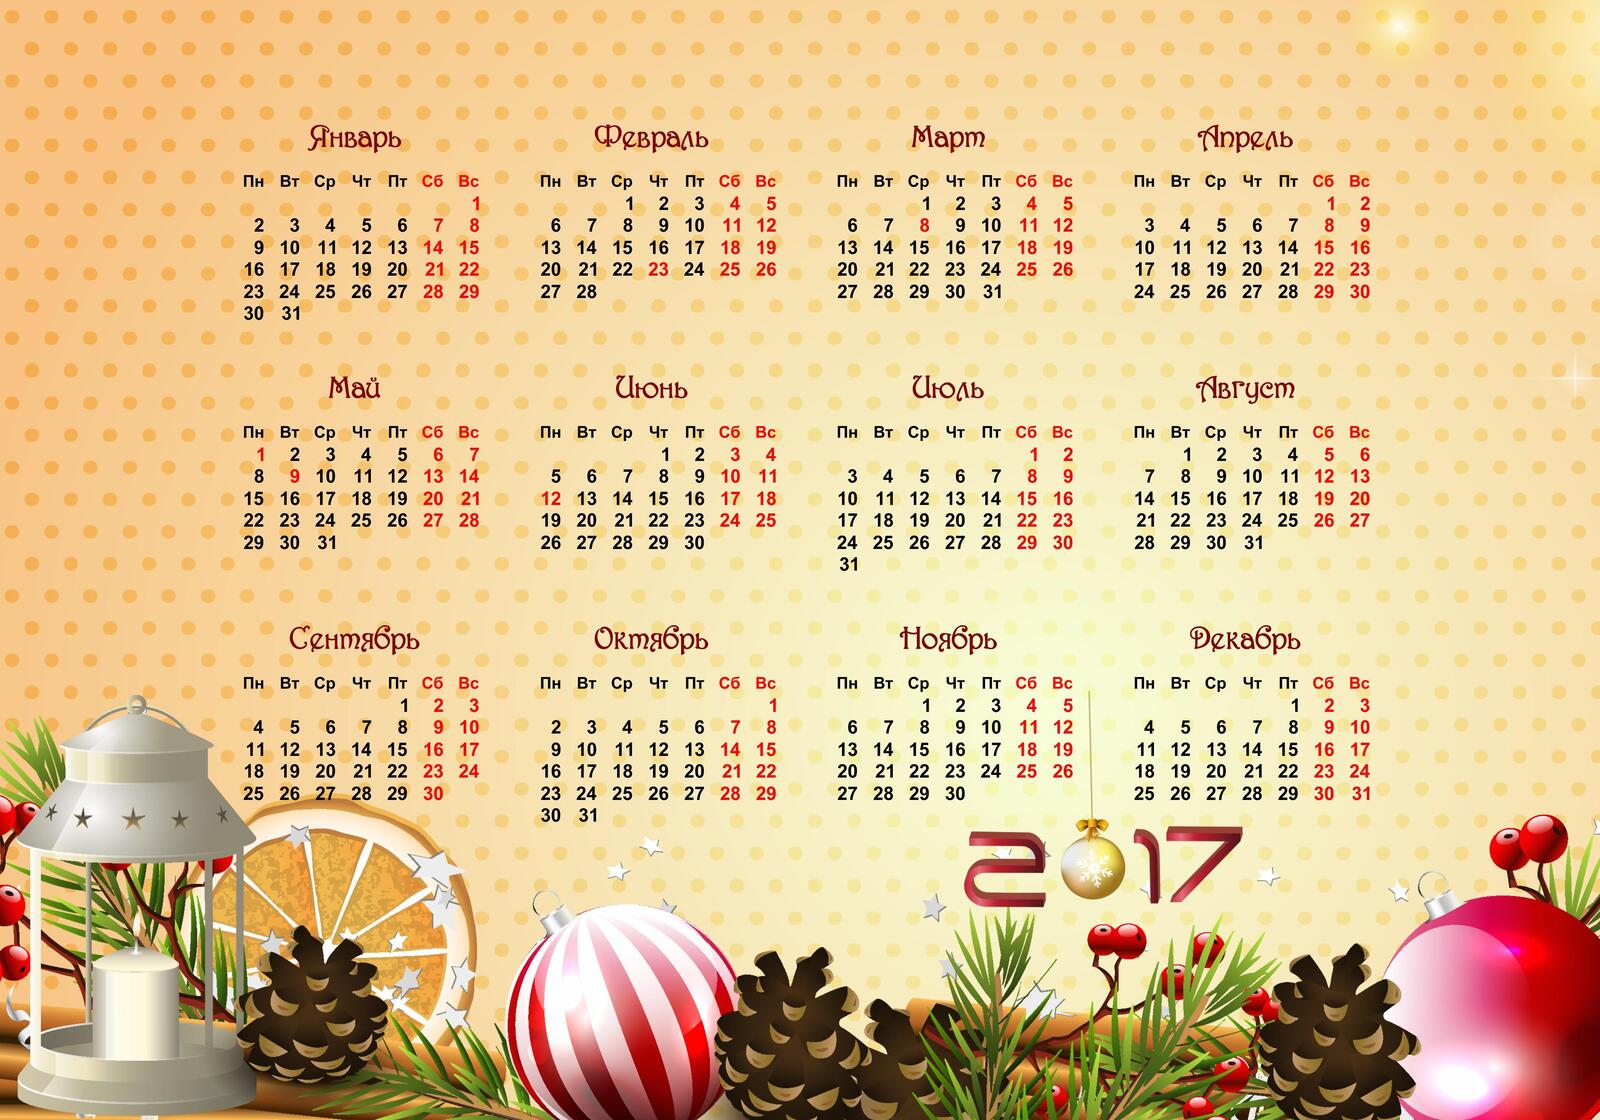 Wallpapers 2017 it 2017 new year on the desktop